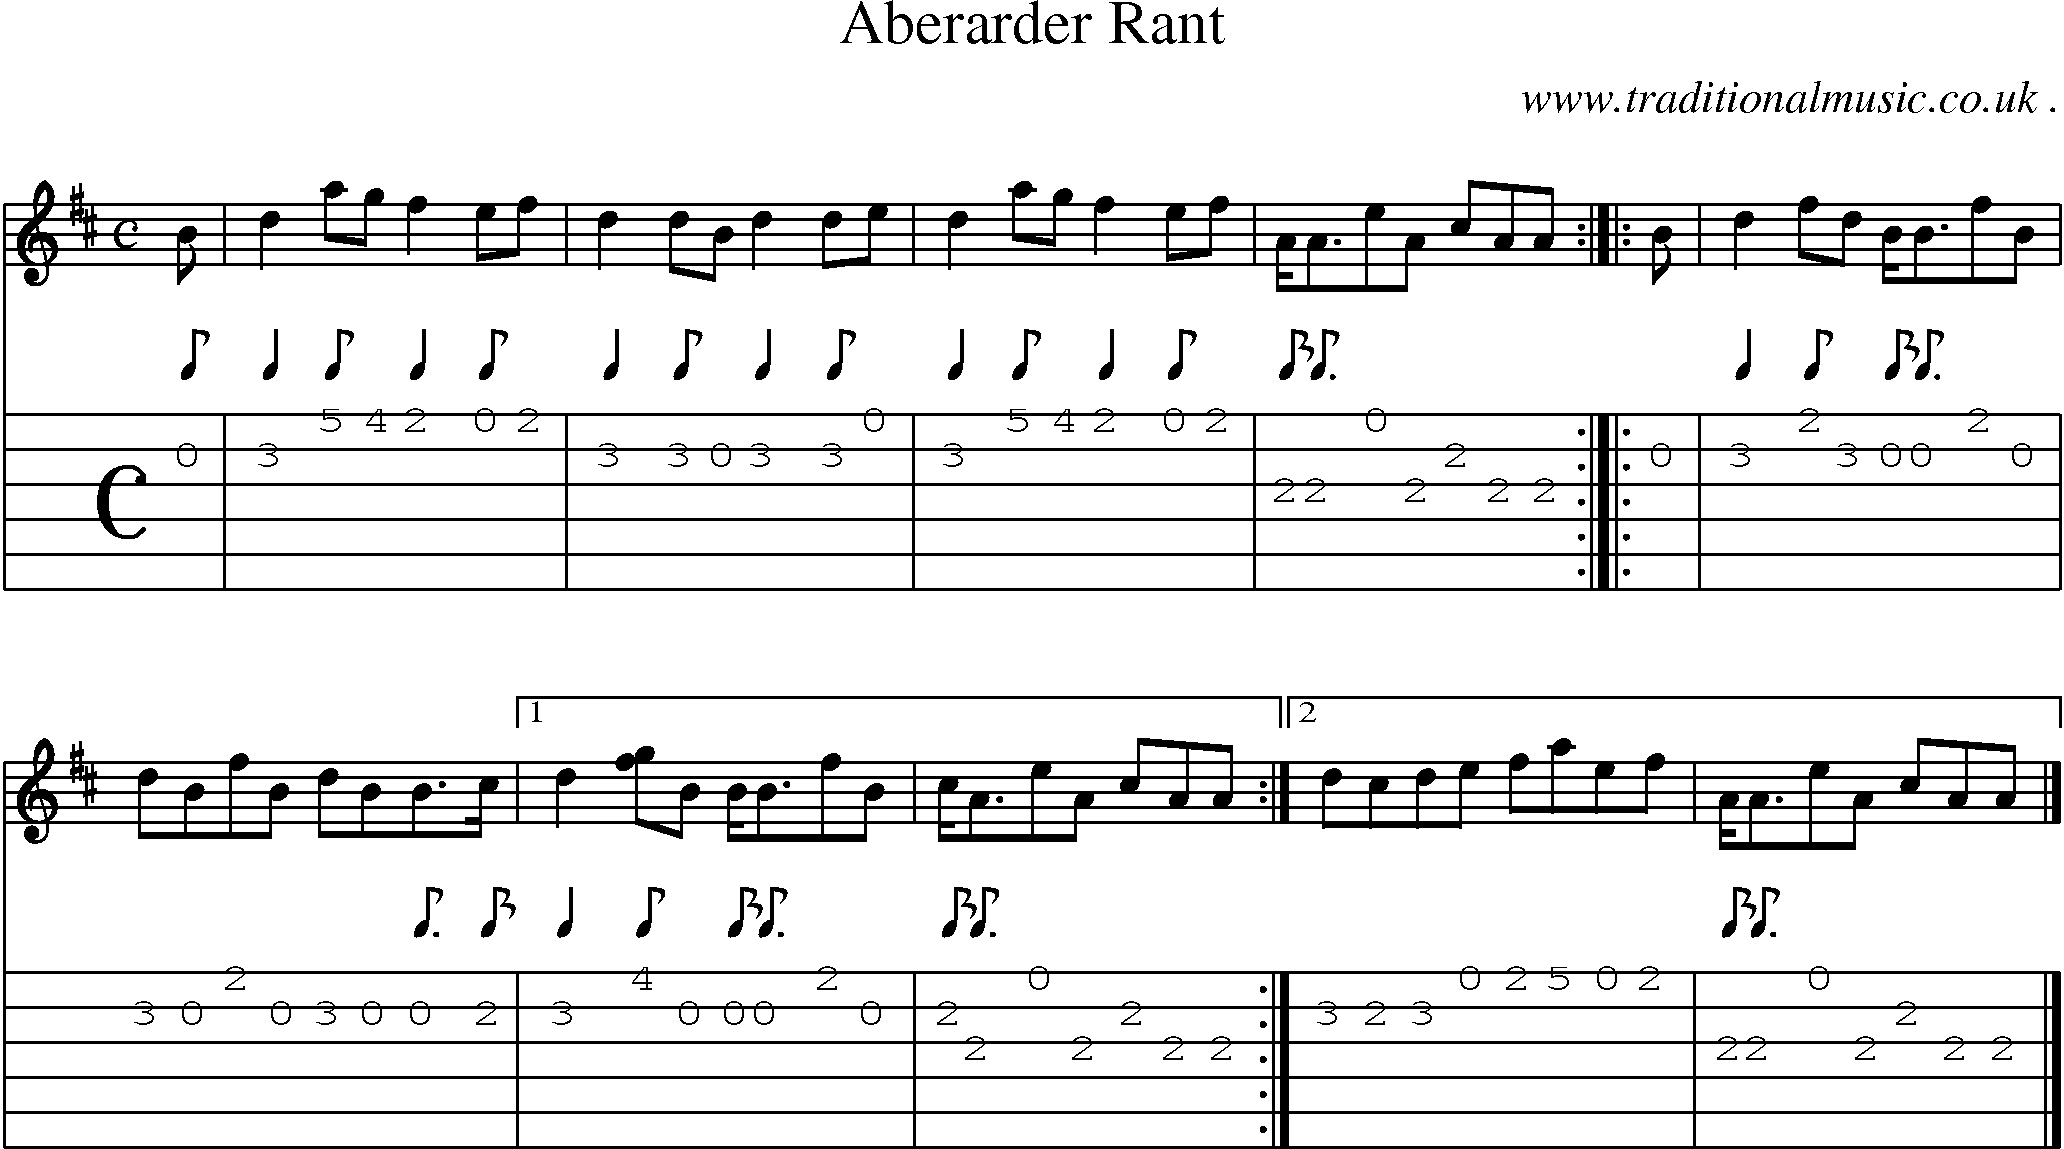 Sheet-music  score, Chords and Guitar Tabs for Aberarder Rant